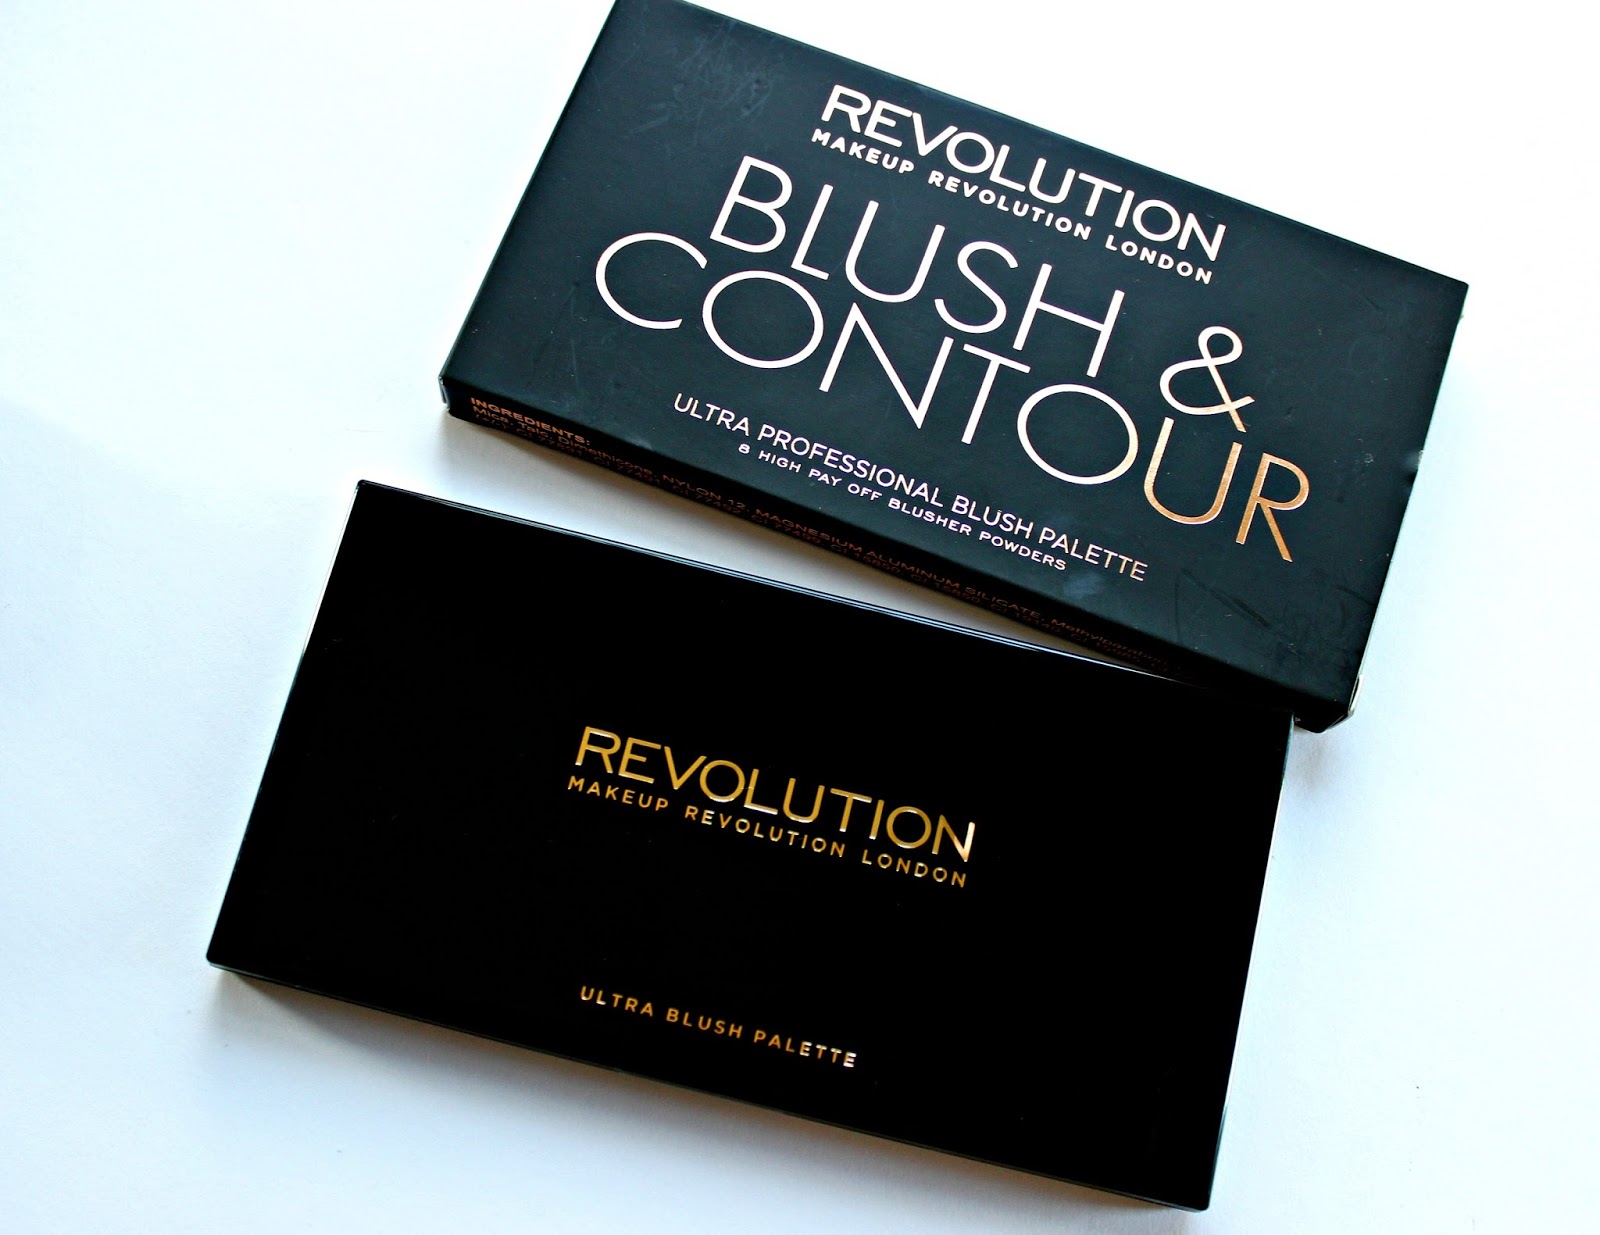 A picture of Makeup Revolution Blush & Contour Palette in Hot Spice